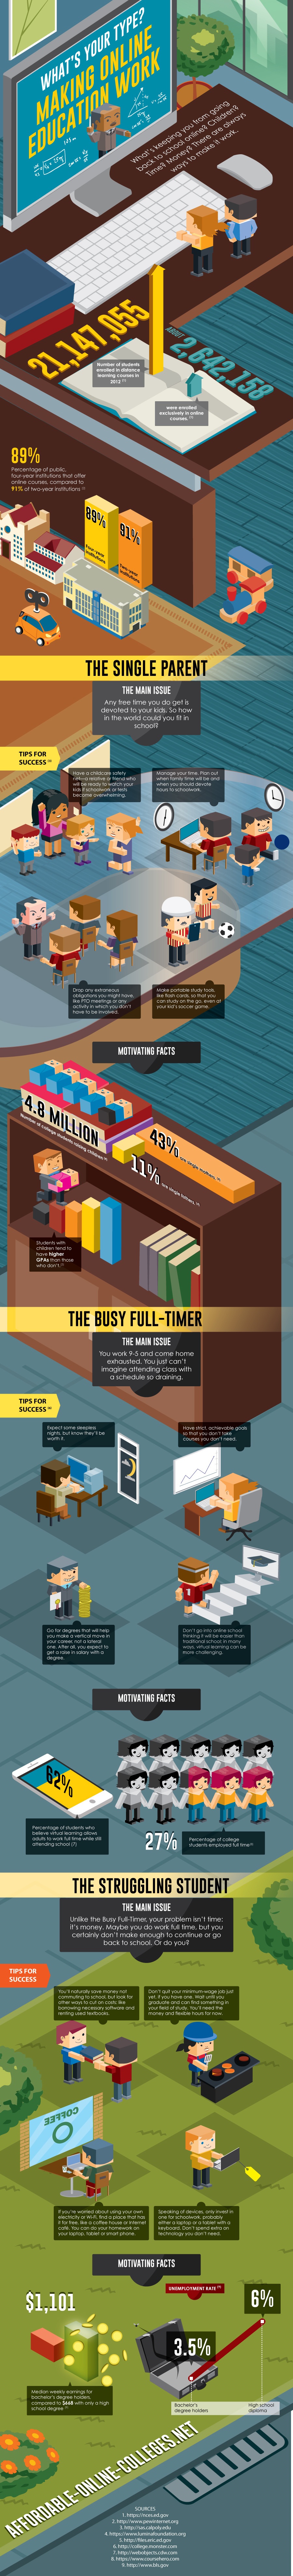 Making Online Education Work Infographic